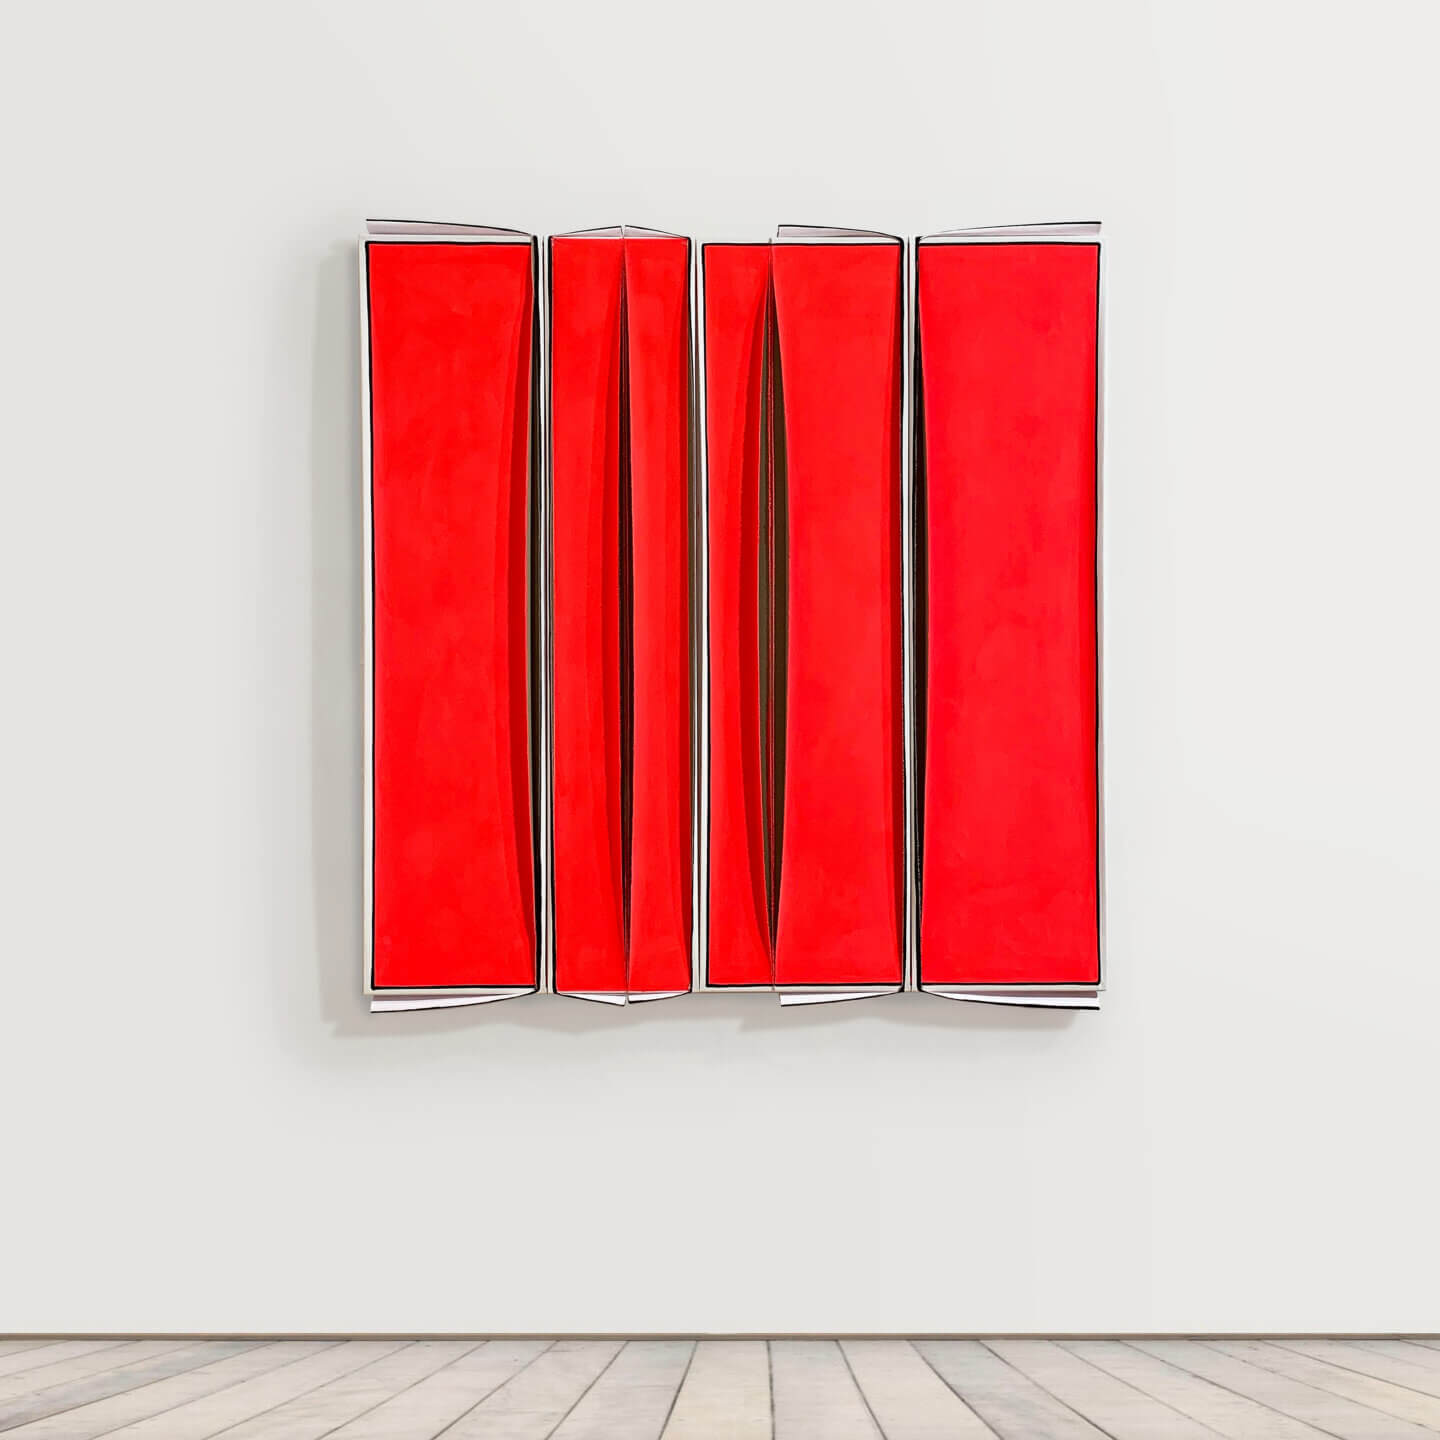 Galerie Benjamin Eck München white gesso, black gesso, red pigment on canvas, torn and folded on stretched frames